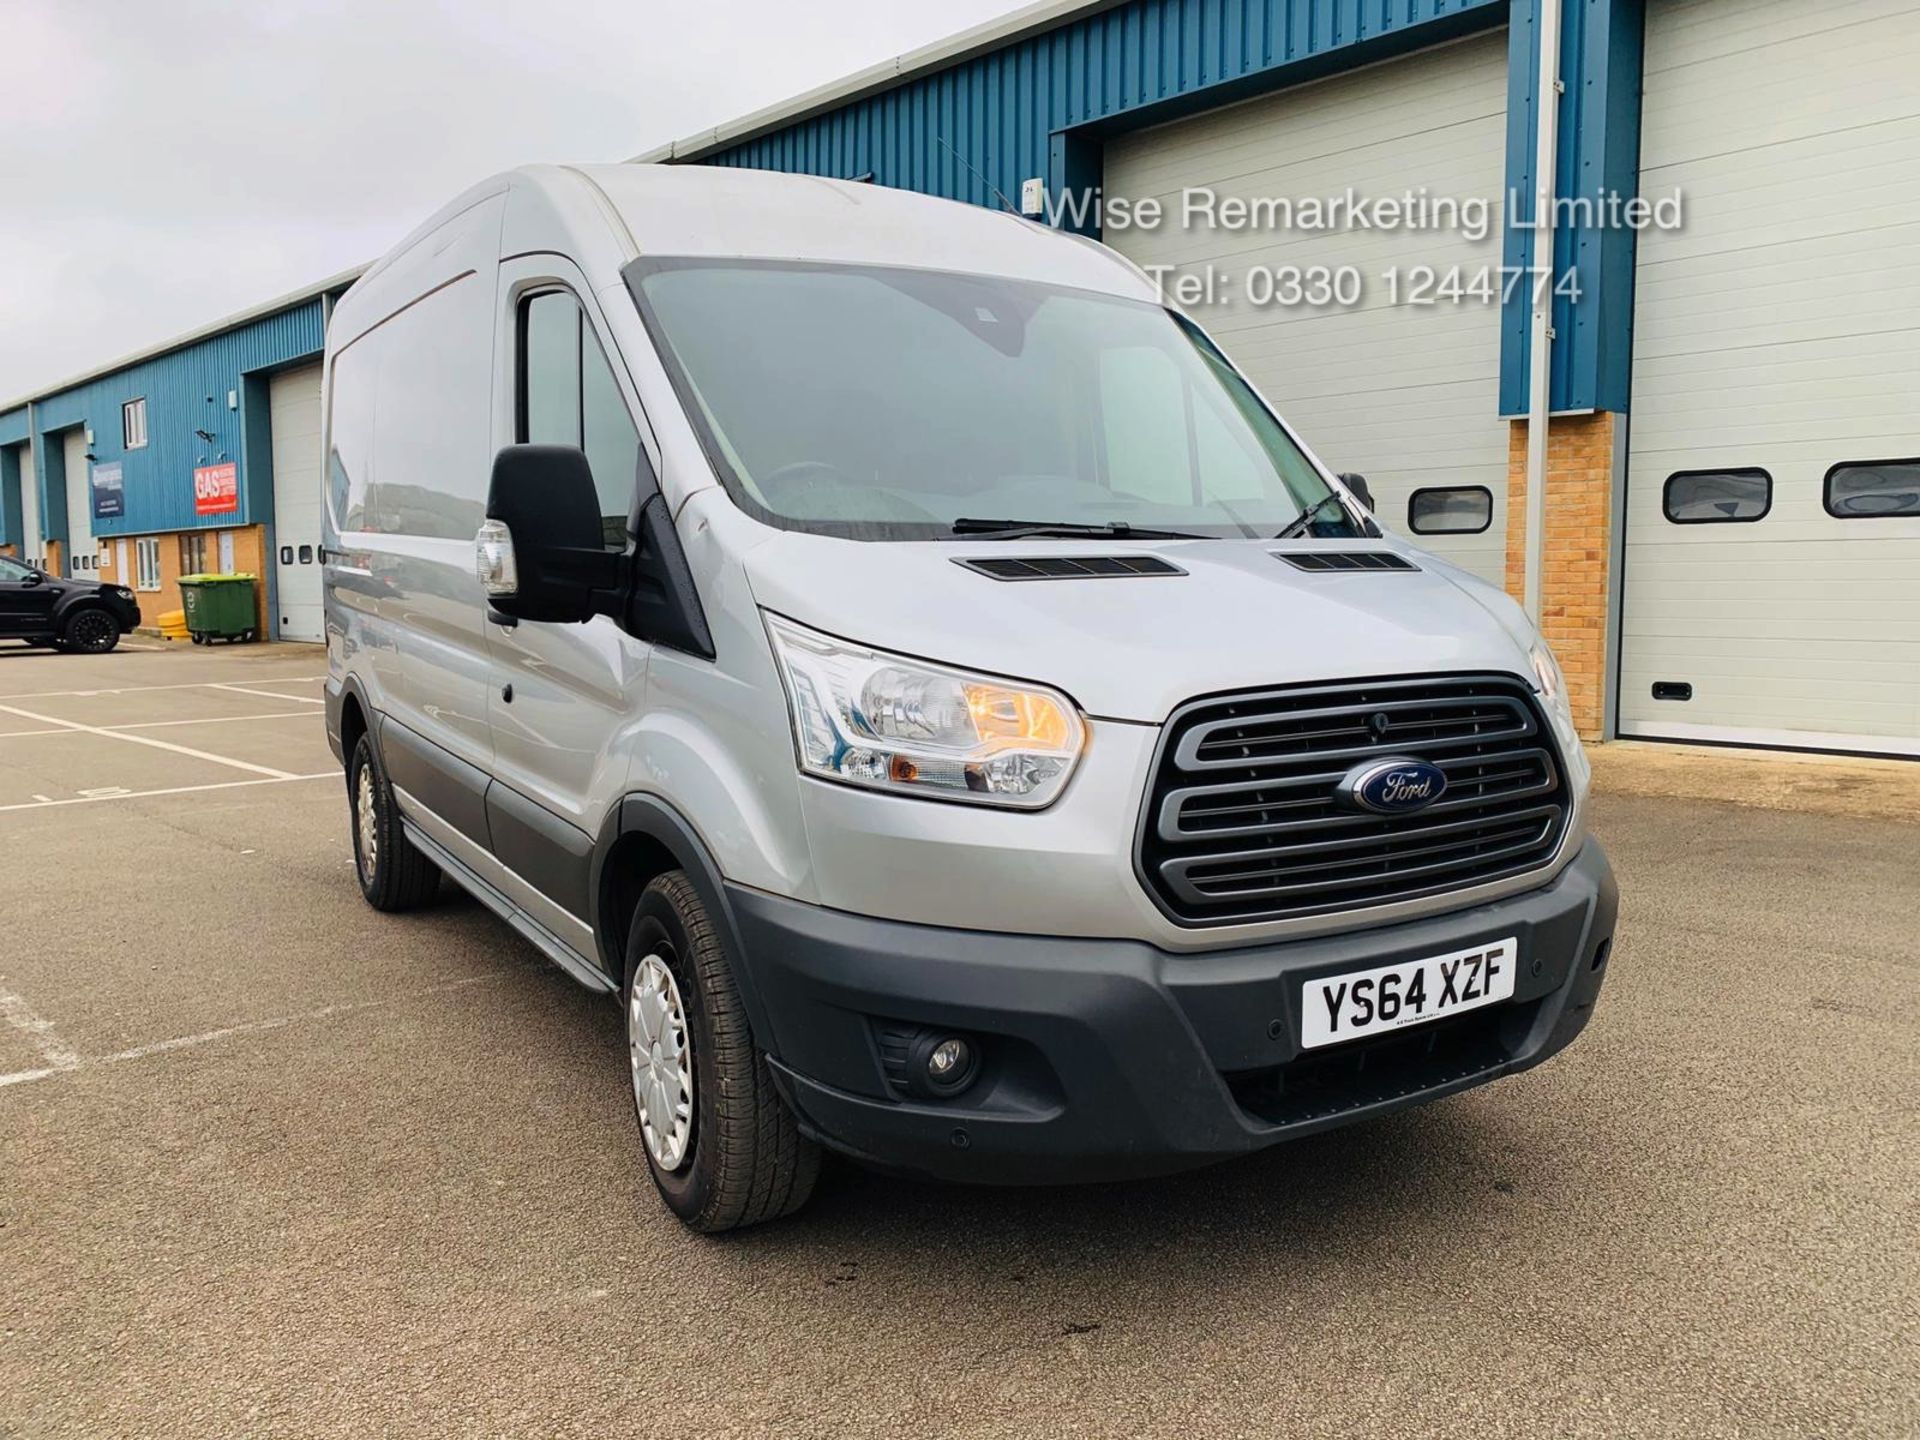 Ford Transit 350 2.2 TDCI Trend Van - 2015 Reg - Silver - 6 Speed - Ply Lined - Image 2 of 20